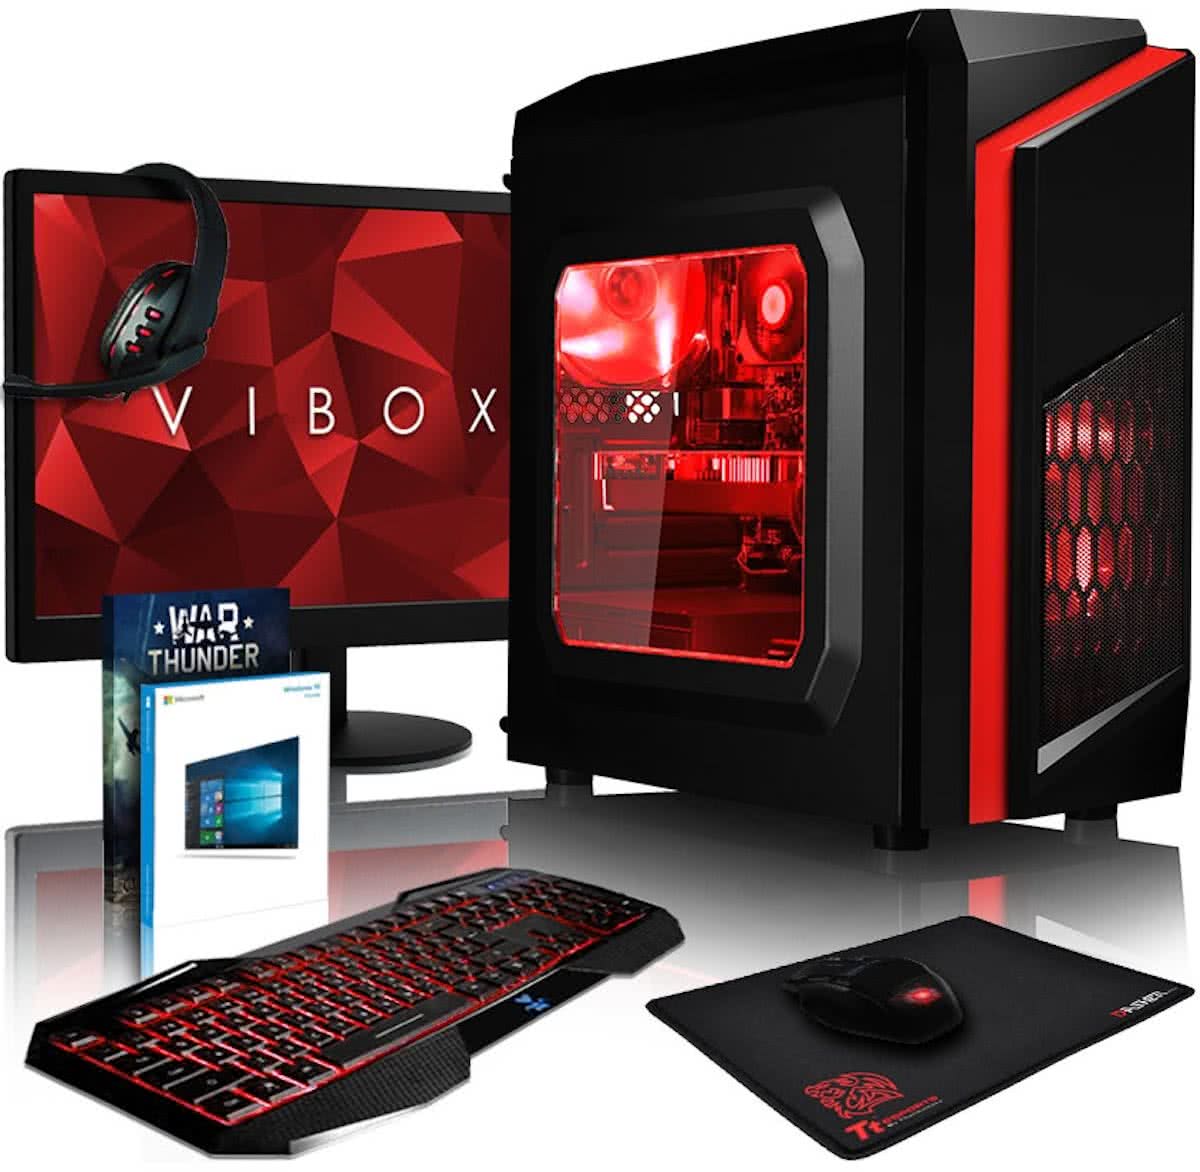 Pc packages. Компьютер комплект. Игровой компьютер. Игровой компьютер комплект. Монитор для компьютера игровой.